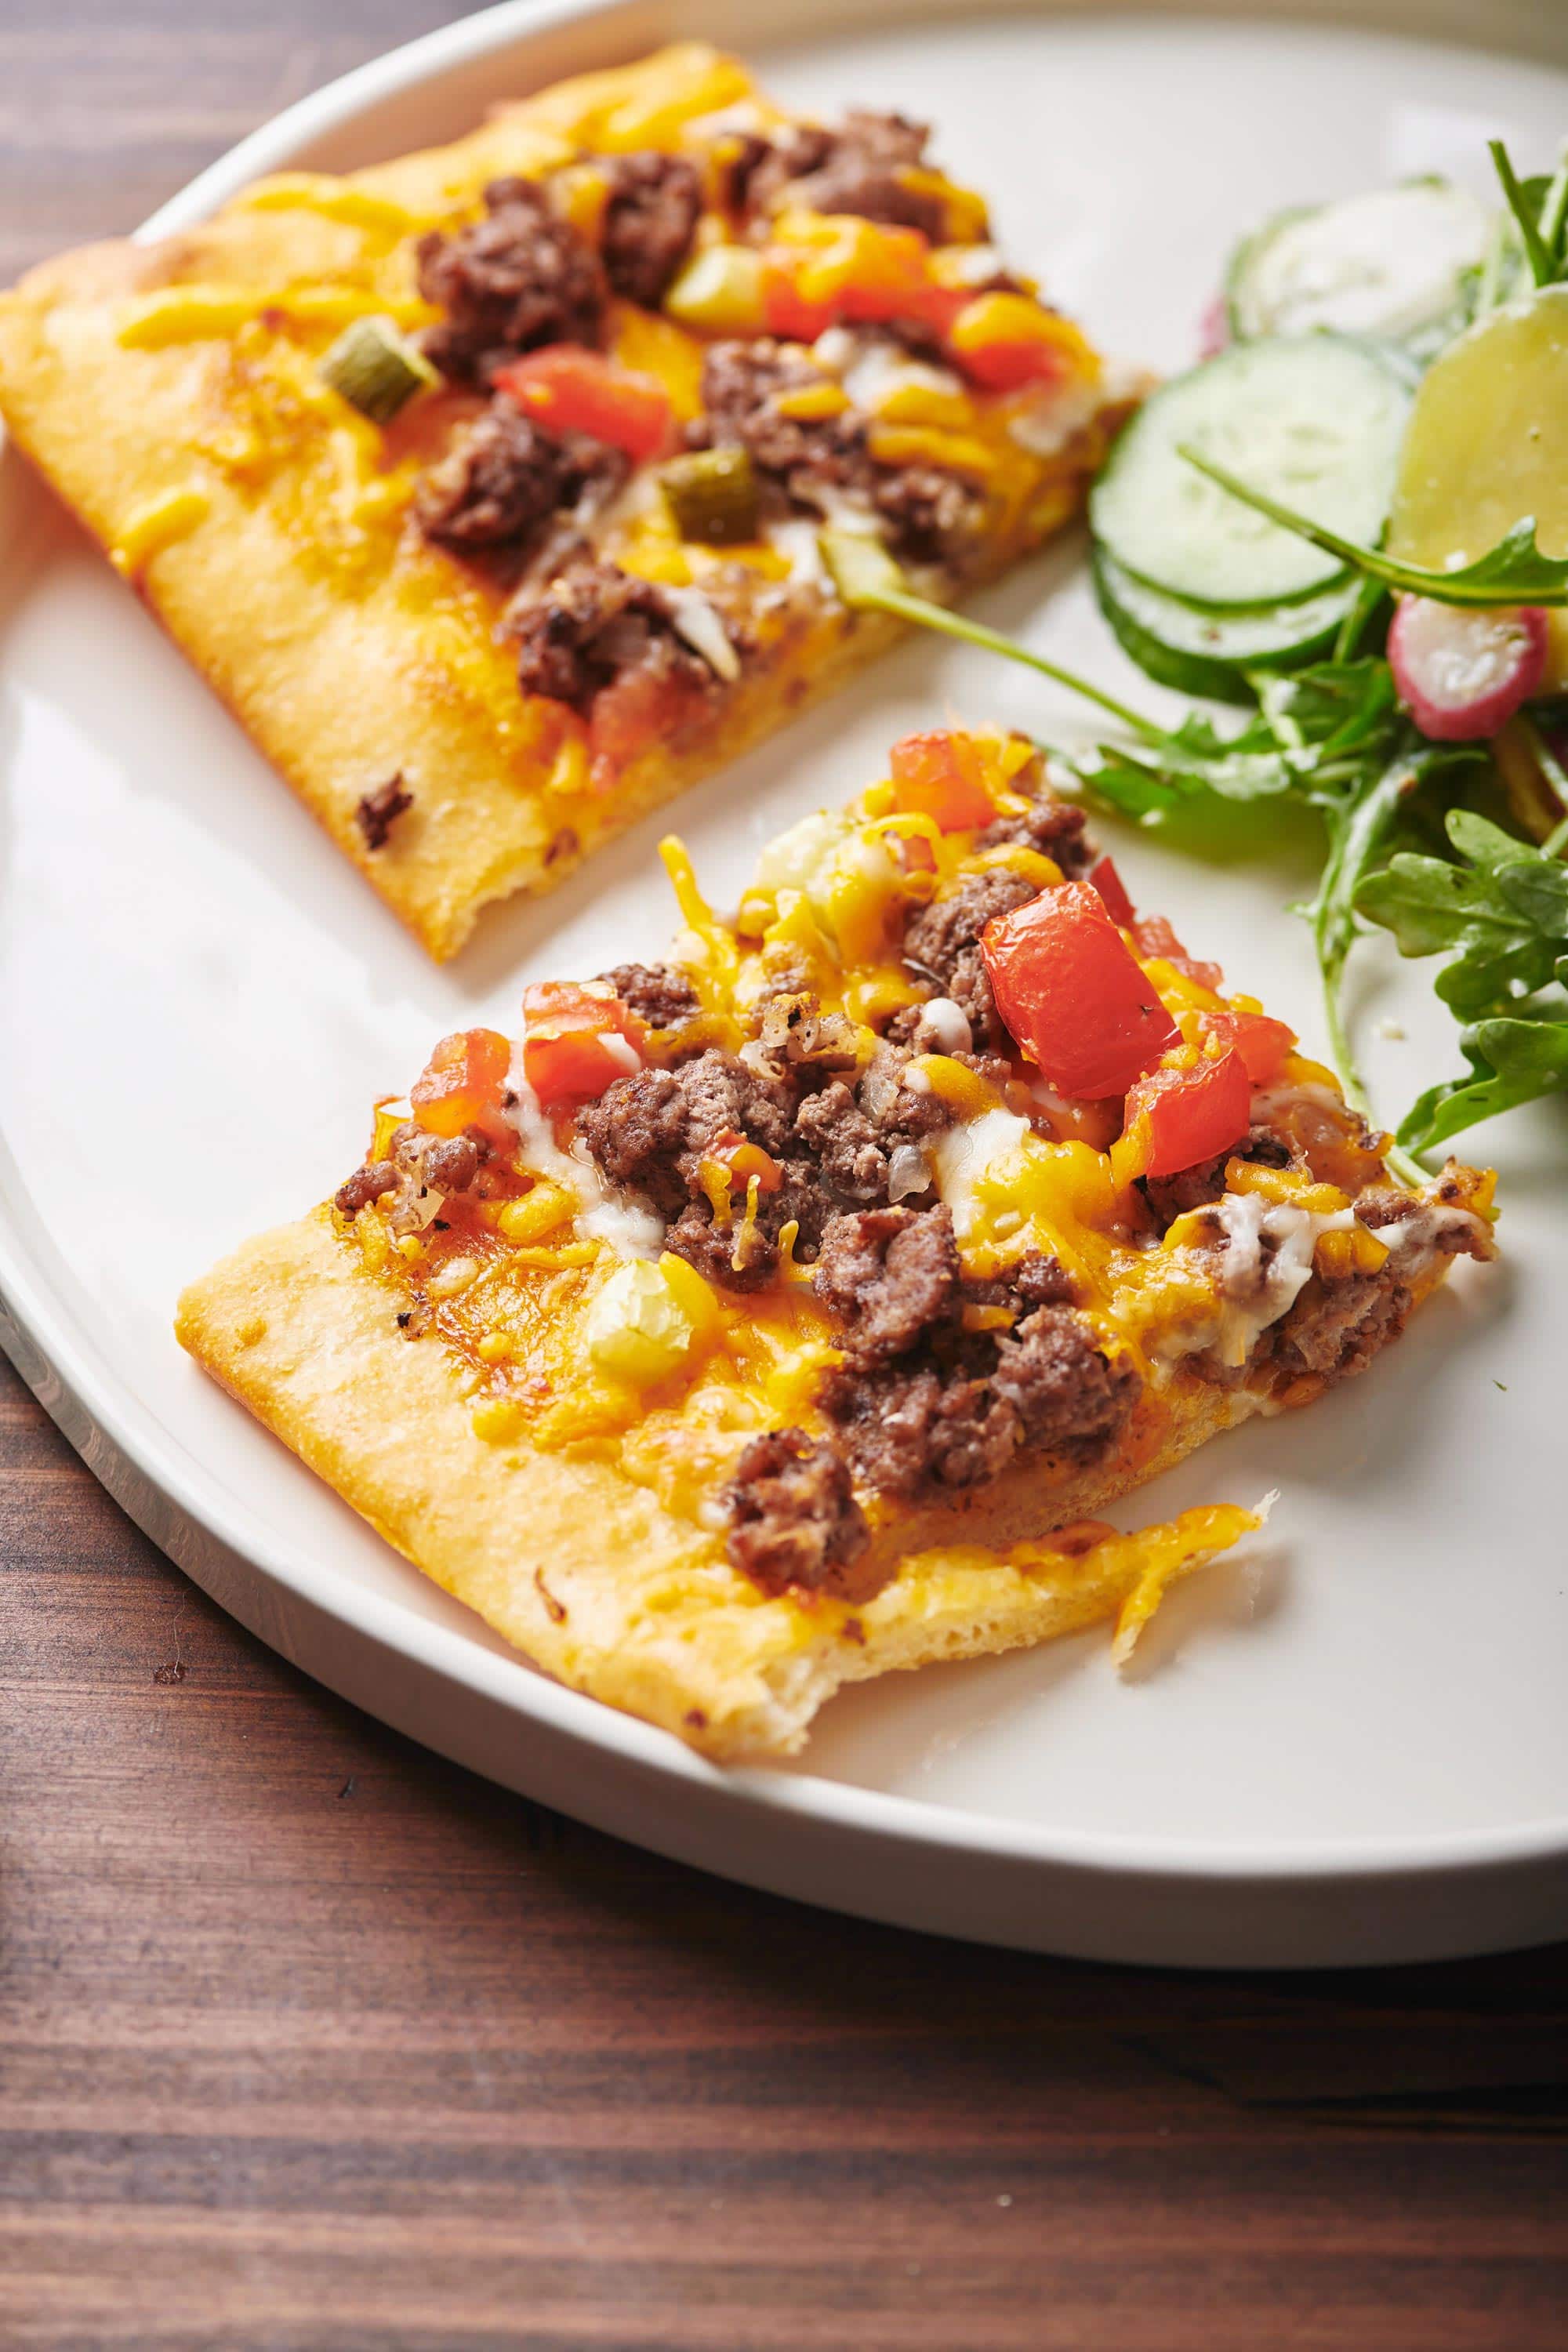 Salad on a plate with slices of Cheeseburger Pizza.